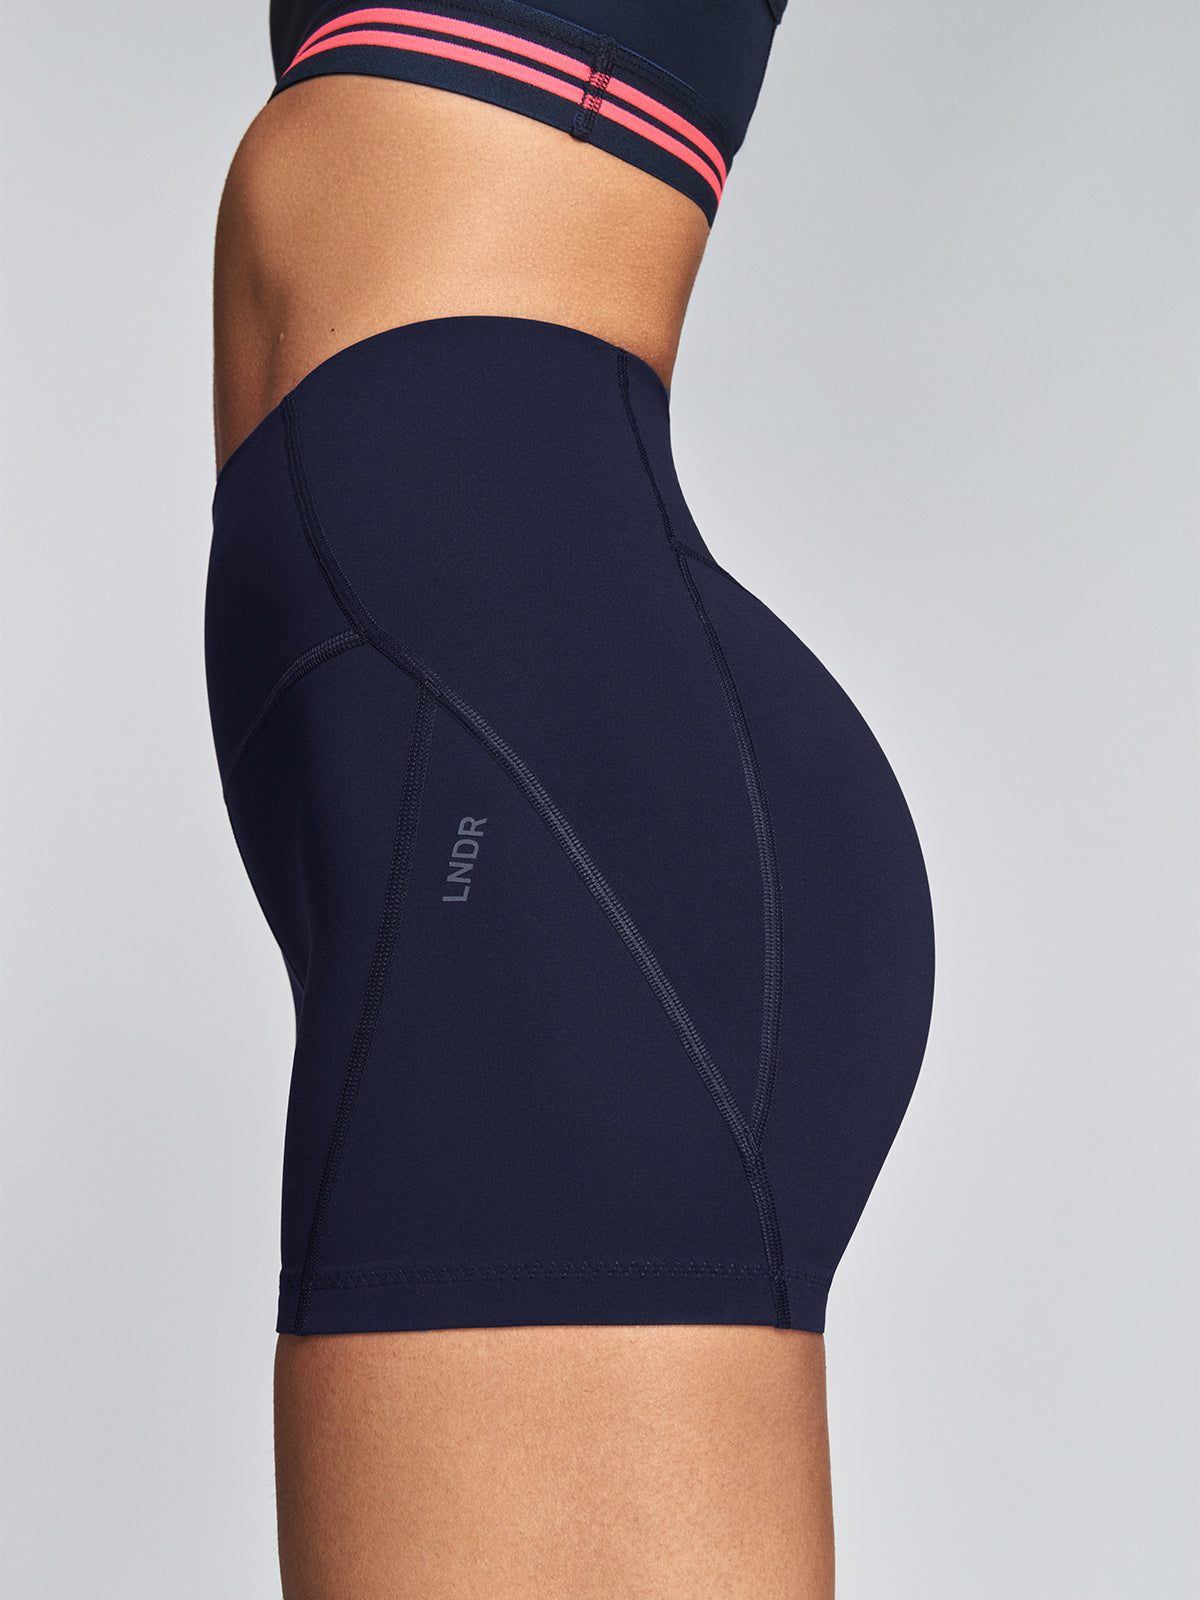 Women's Cool Navy CrossFit® sport shorts | Resilience Skill